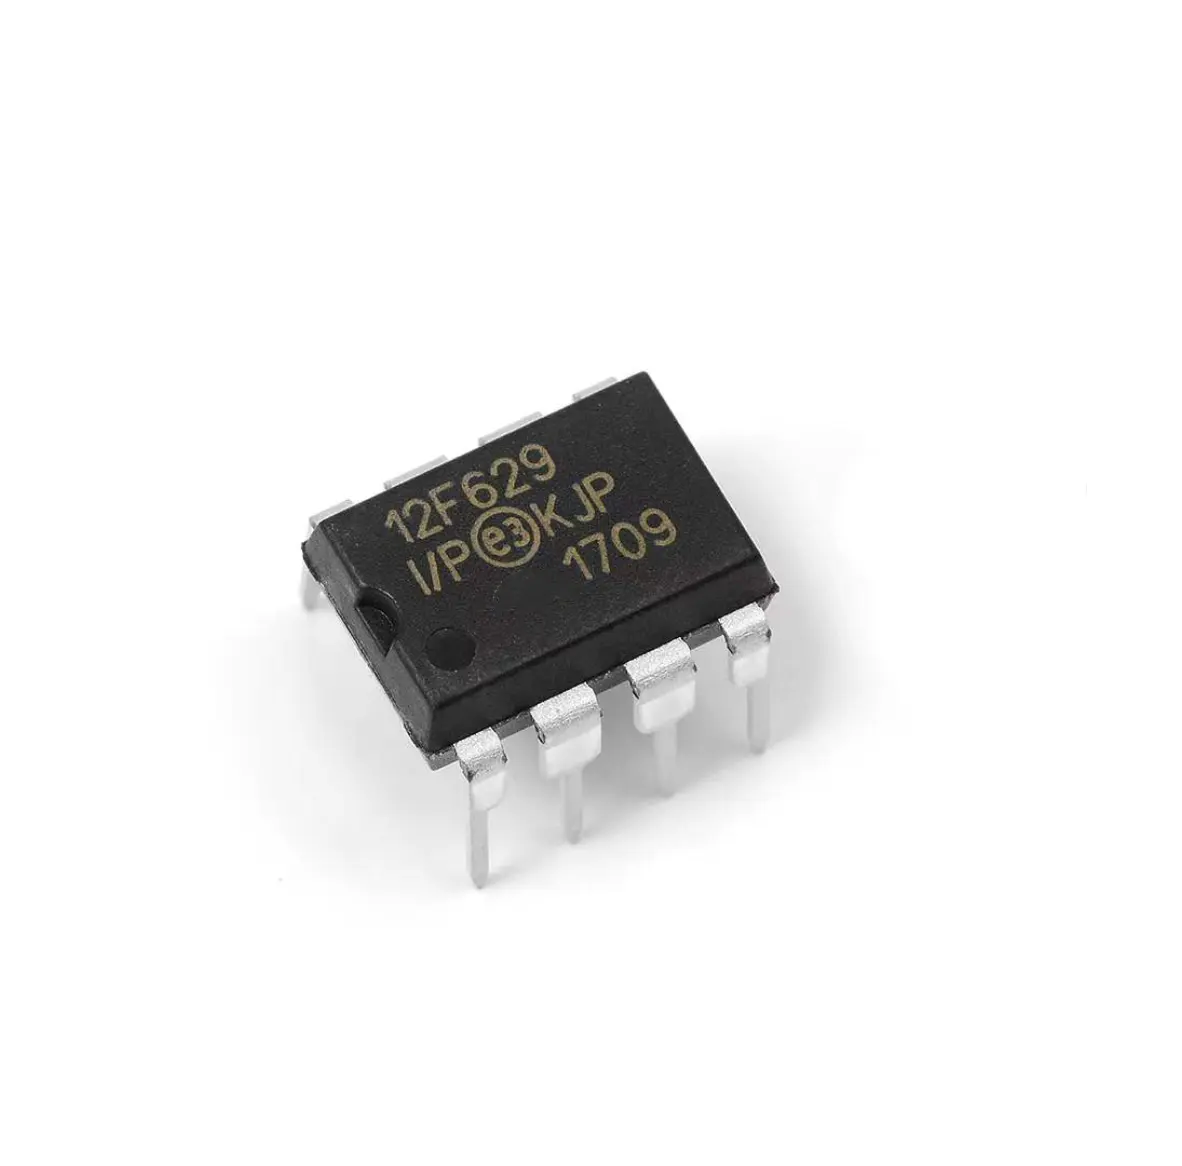 Changyang Chips PIC12F675-I/P PIC12F675 PIC12F629-E/SN Microcontroller IC Integrated Circuit DIP-8 PIC12F675-IP